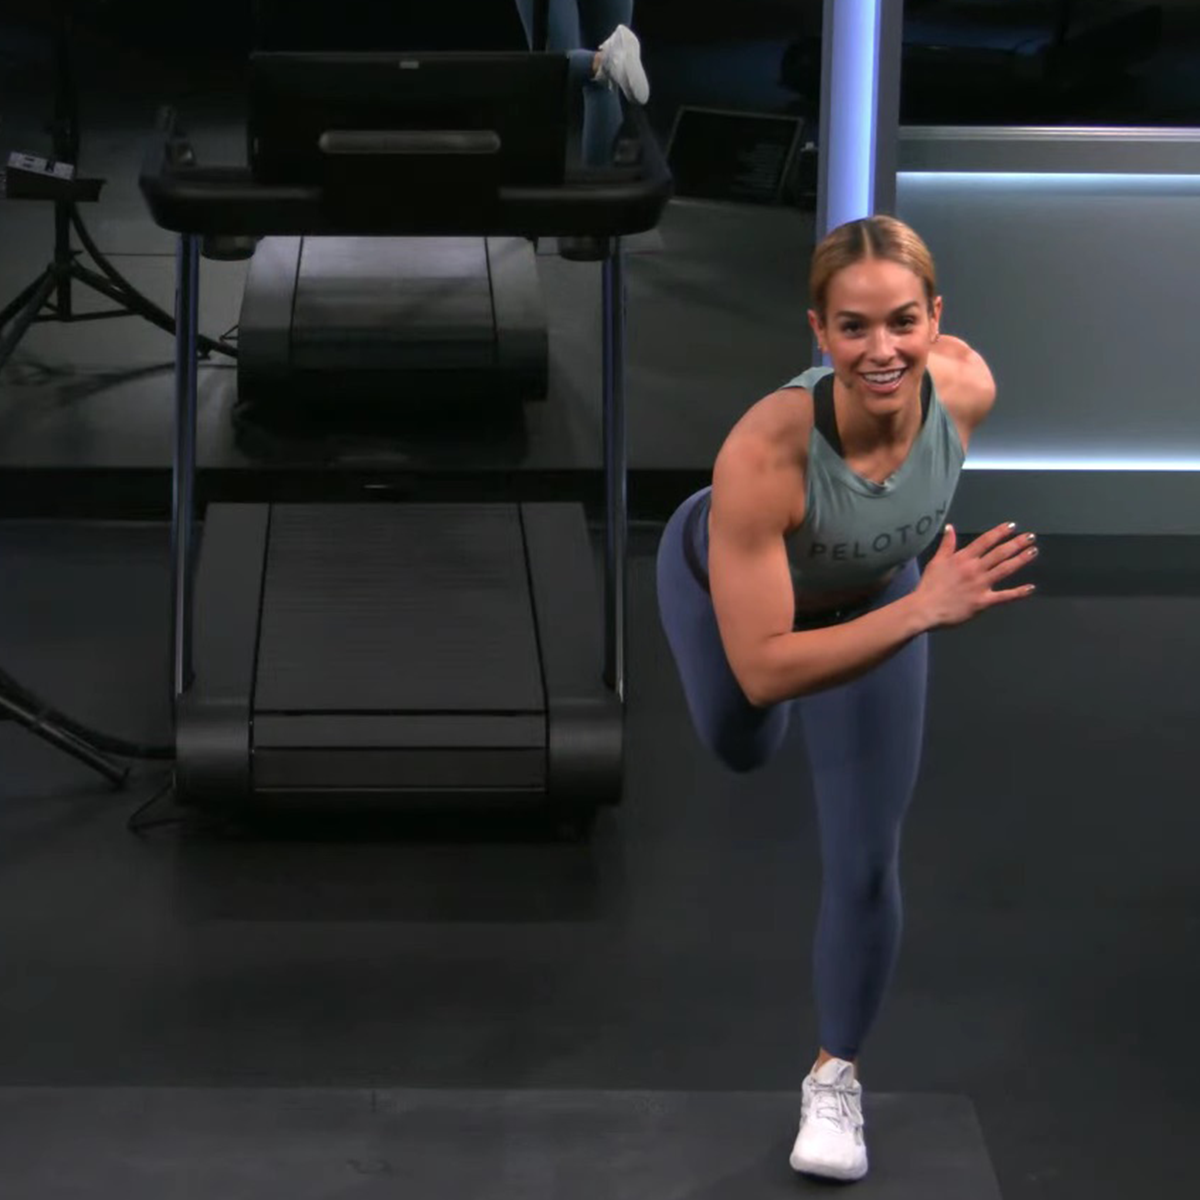 Peloton Instructor Jess Sims Shares Her Favorite Stretching Exercises